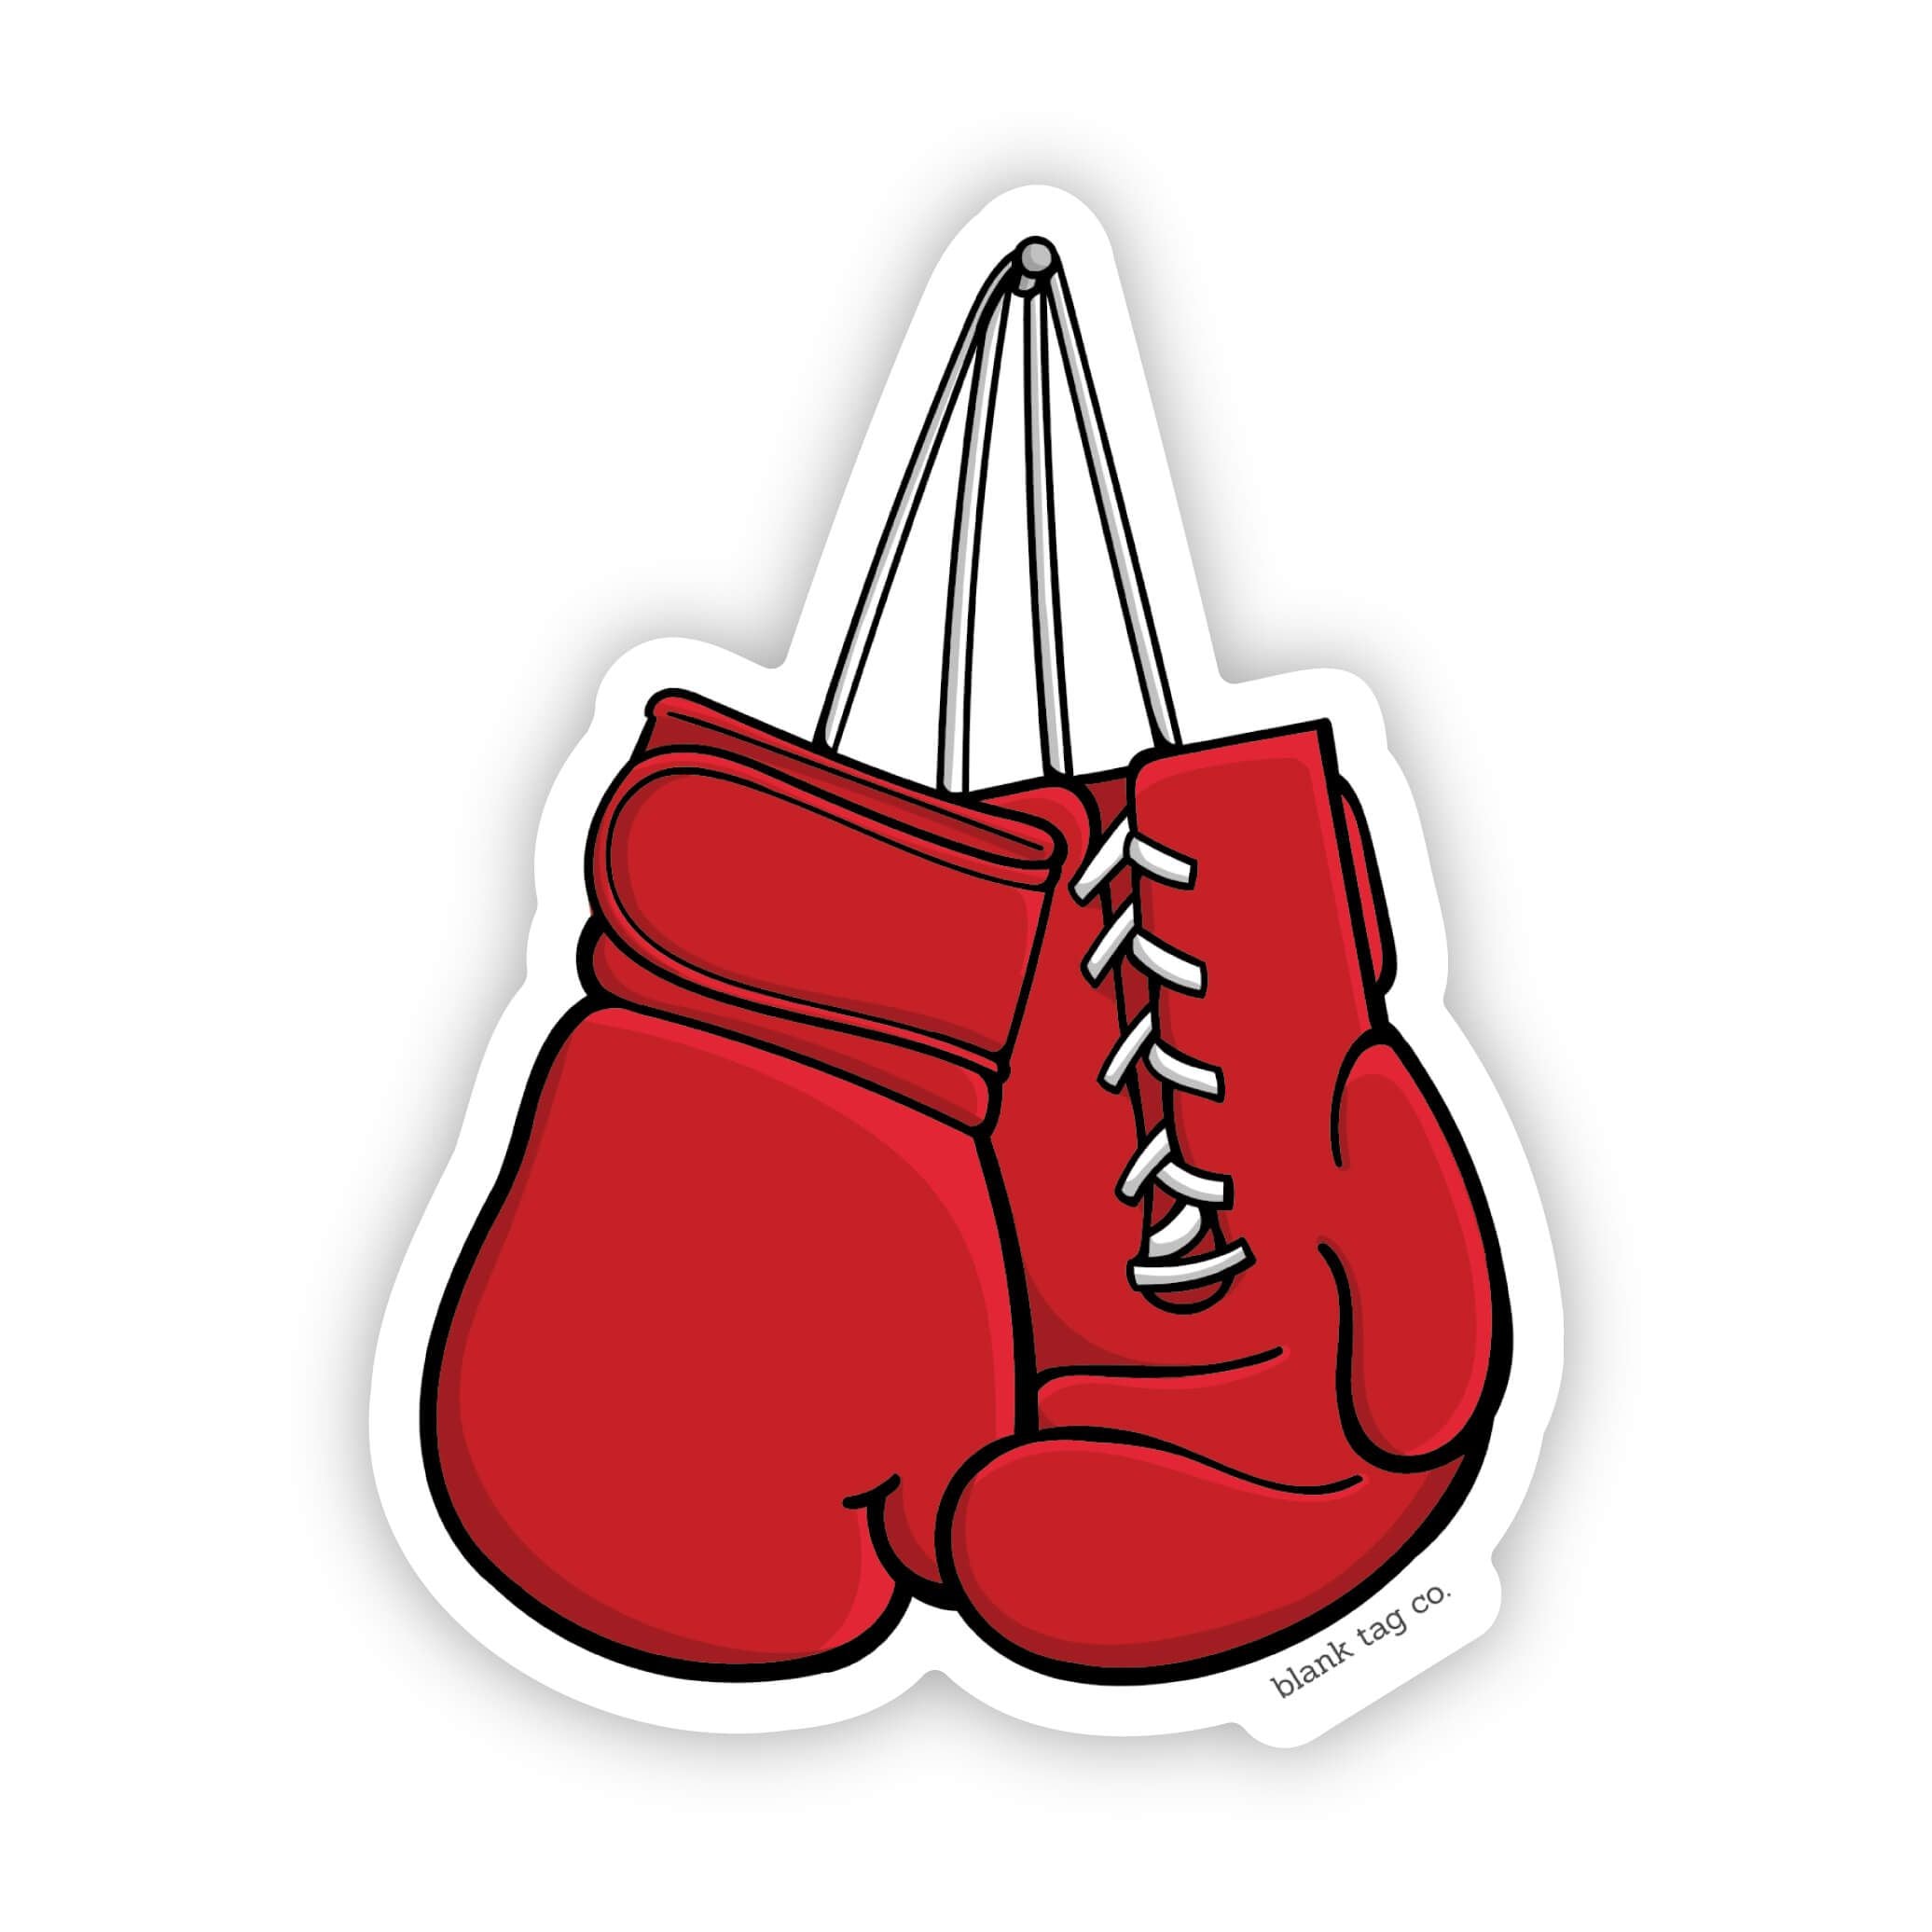 The Boxing Gloves Stickers